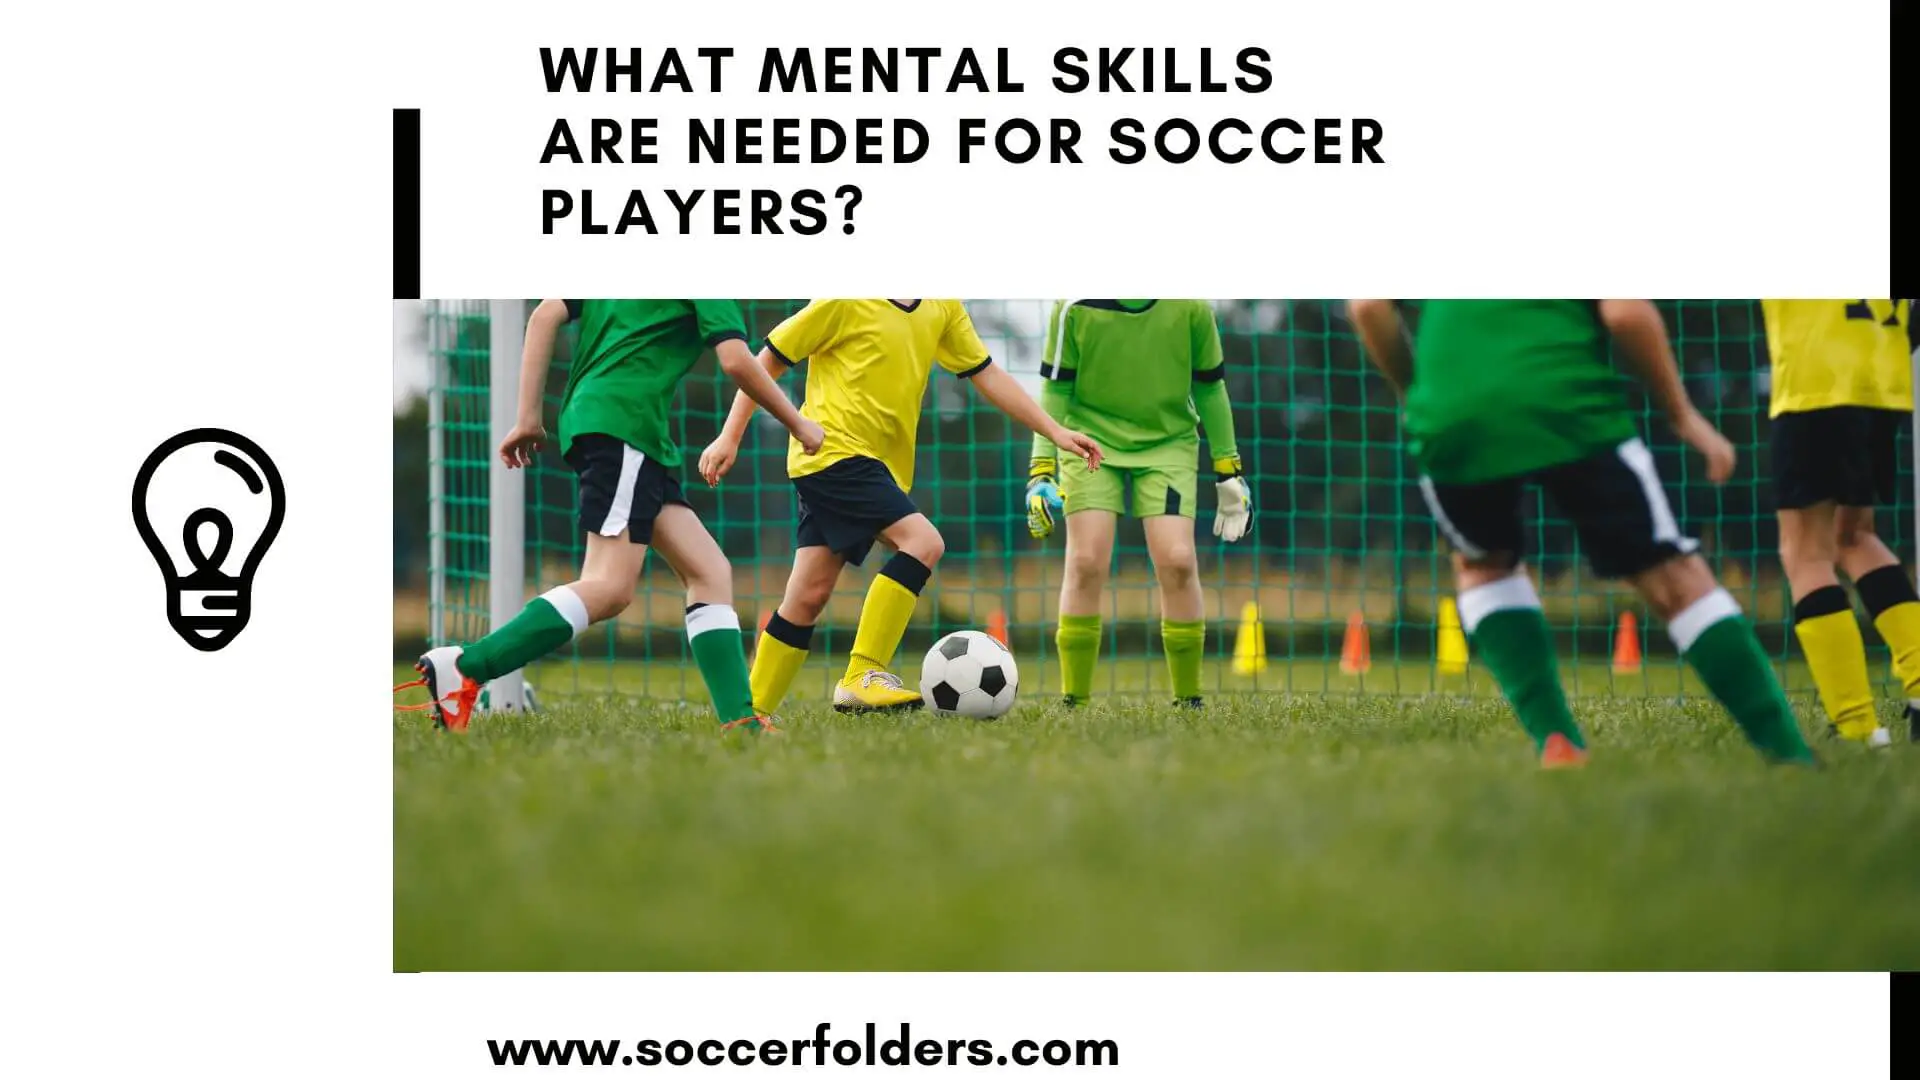 What mental skills are needed for soccer - Featured image